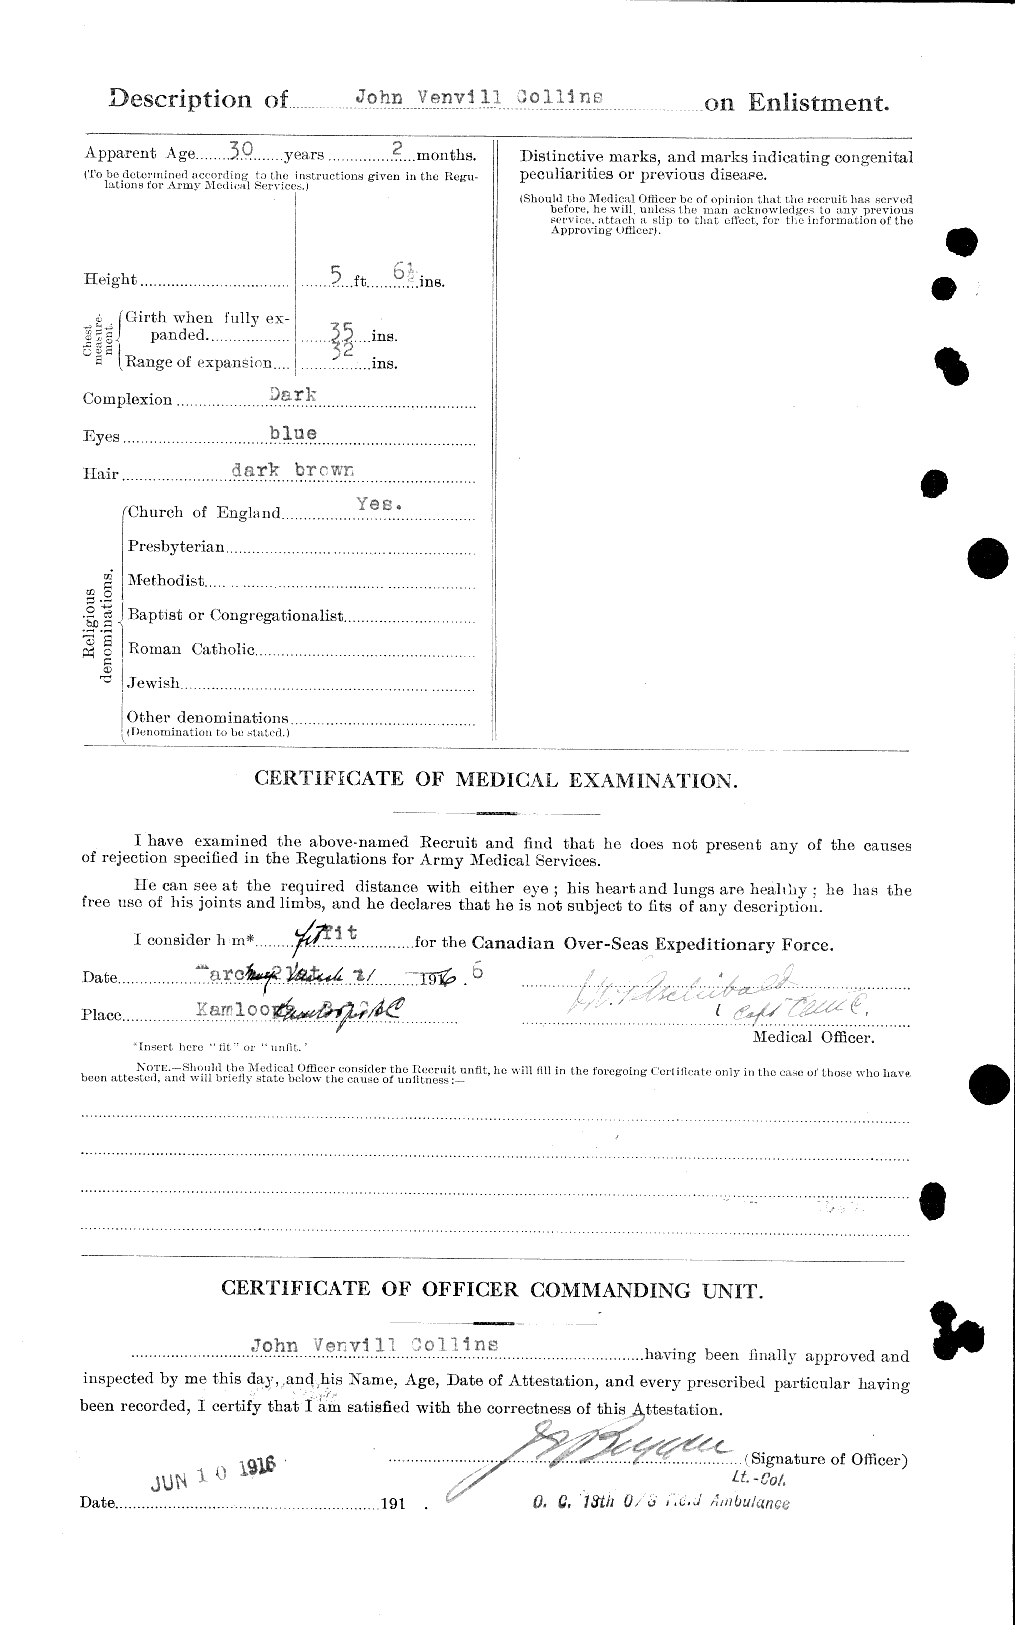 Personnel Records of the First World War - CEF 034385b